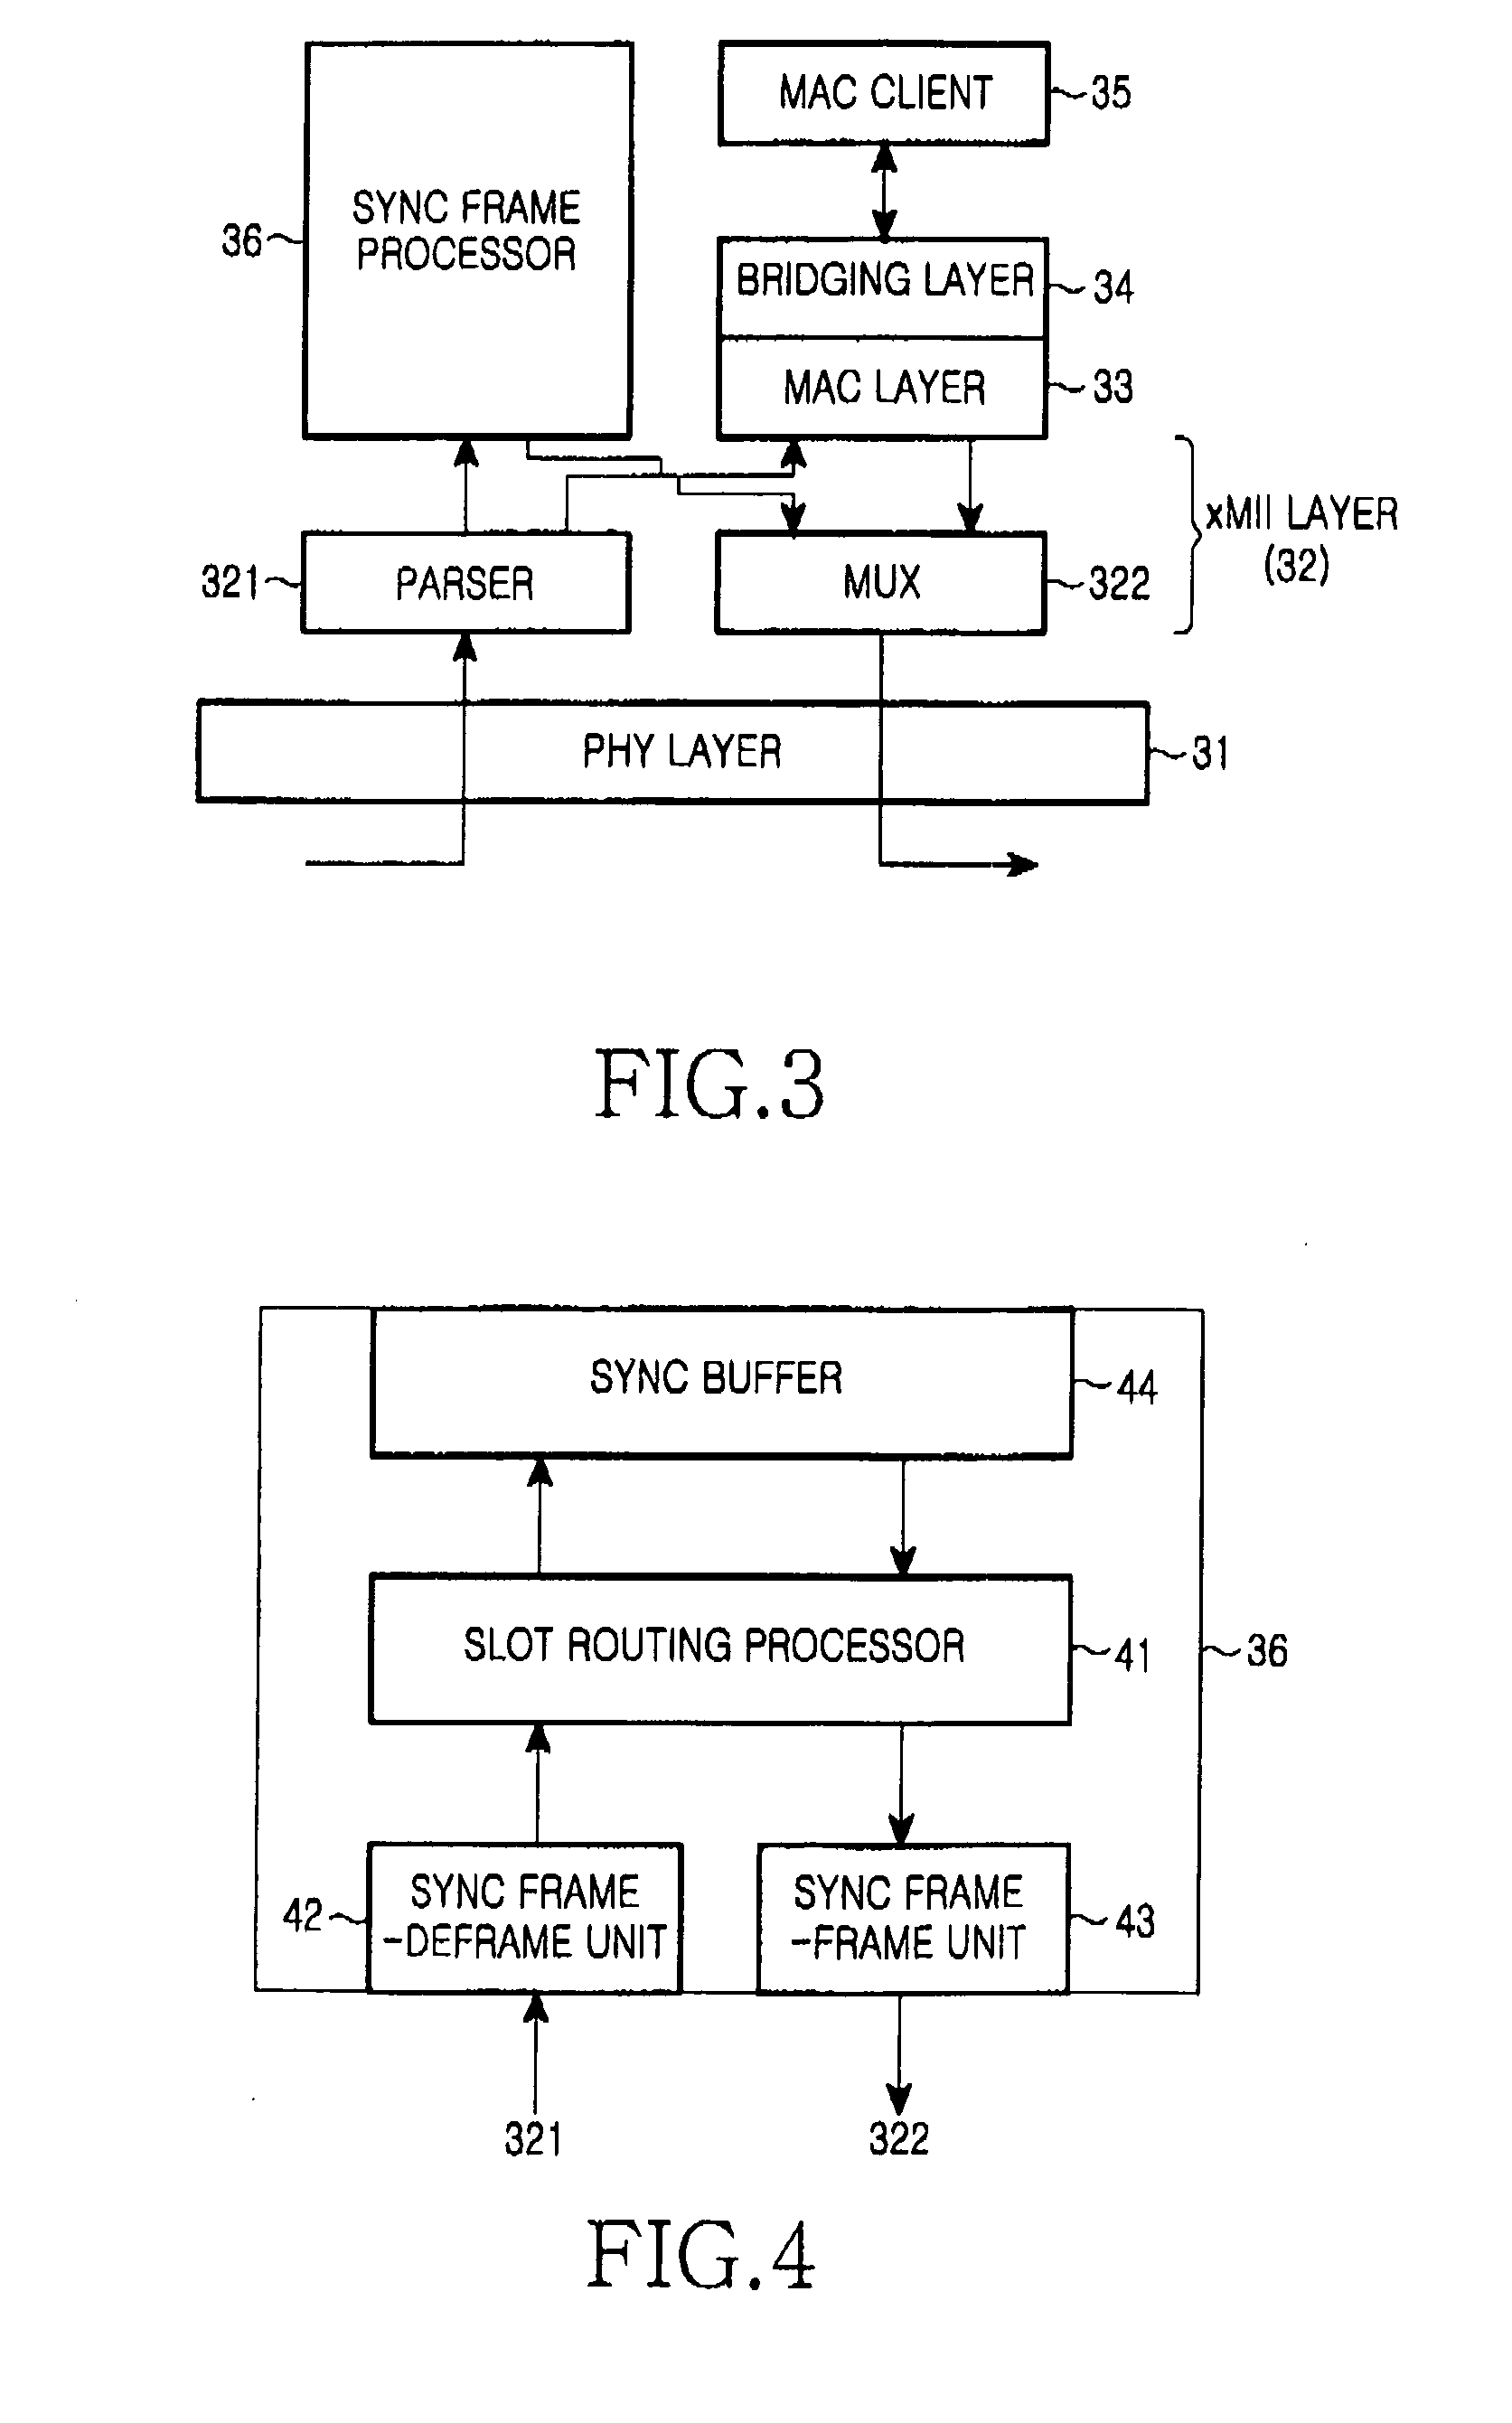 Method of configuring system layers for synchronous Ethernet